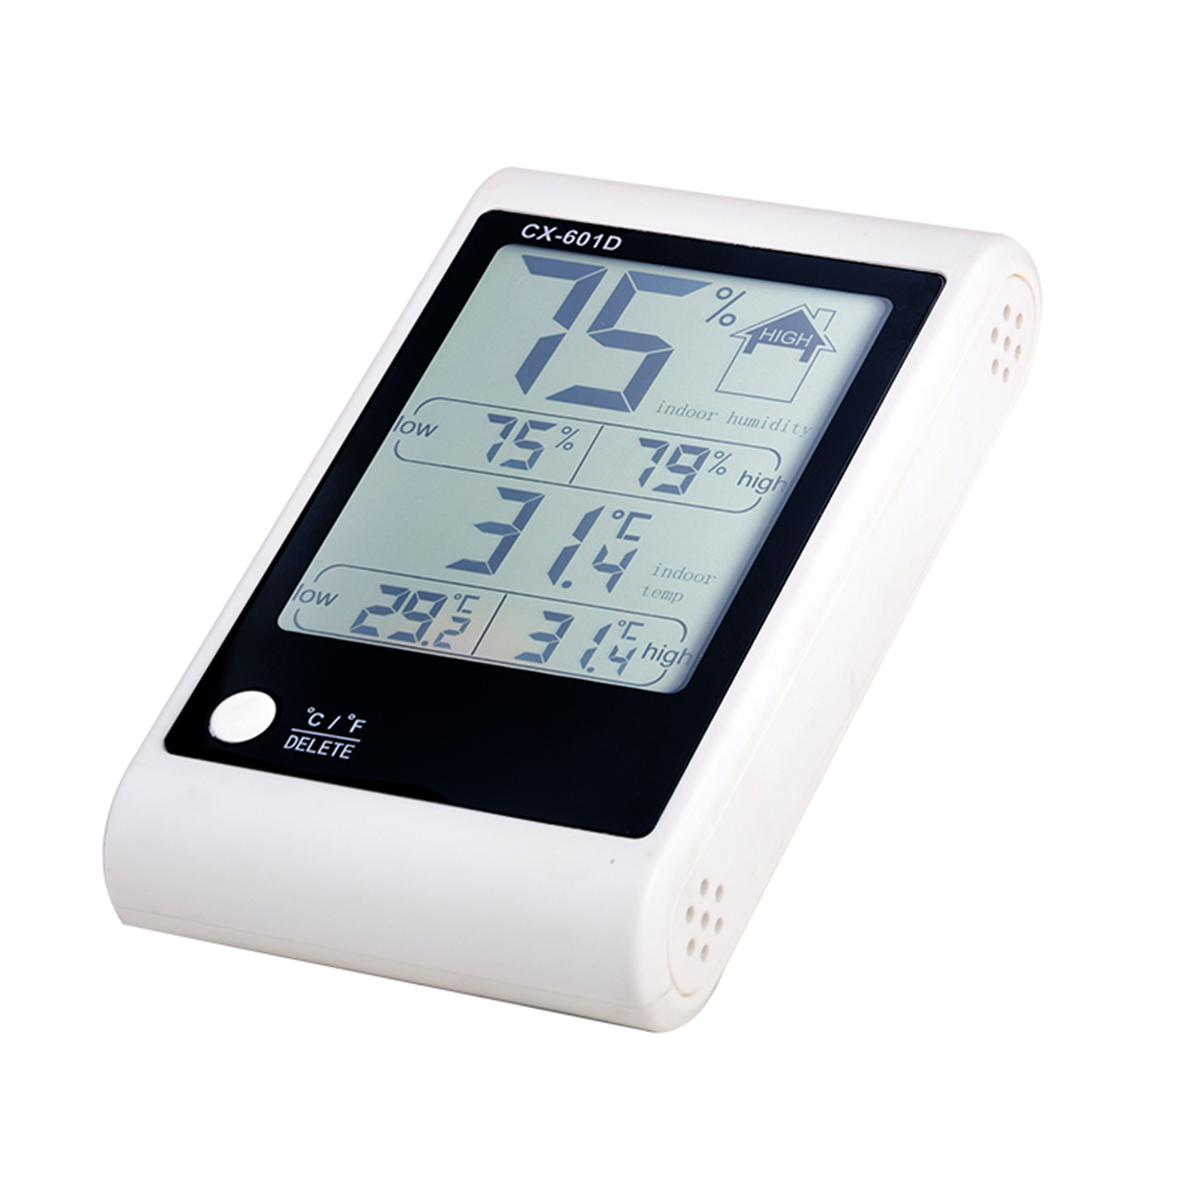 

ThermoPro TP50 Digital LCD Indoor Thermometer Hygrometer Meter Temperature Humidity